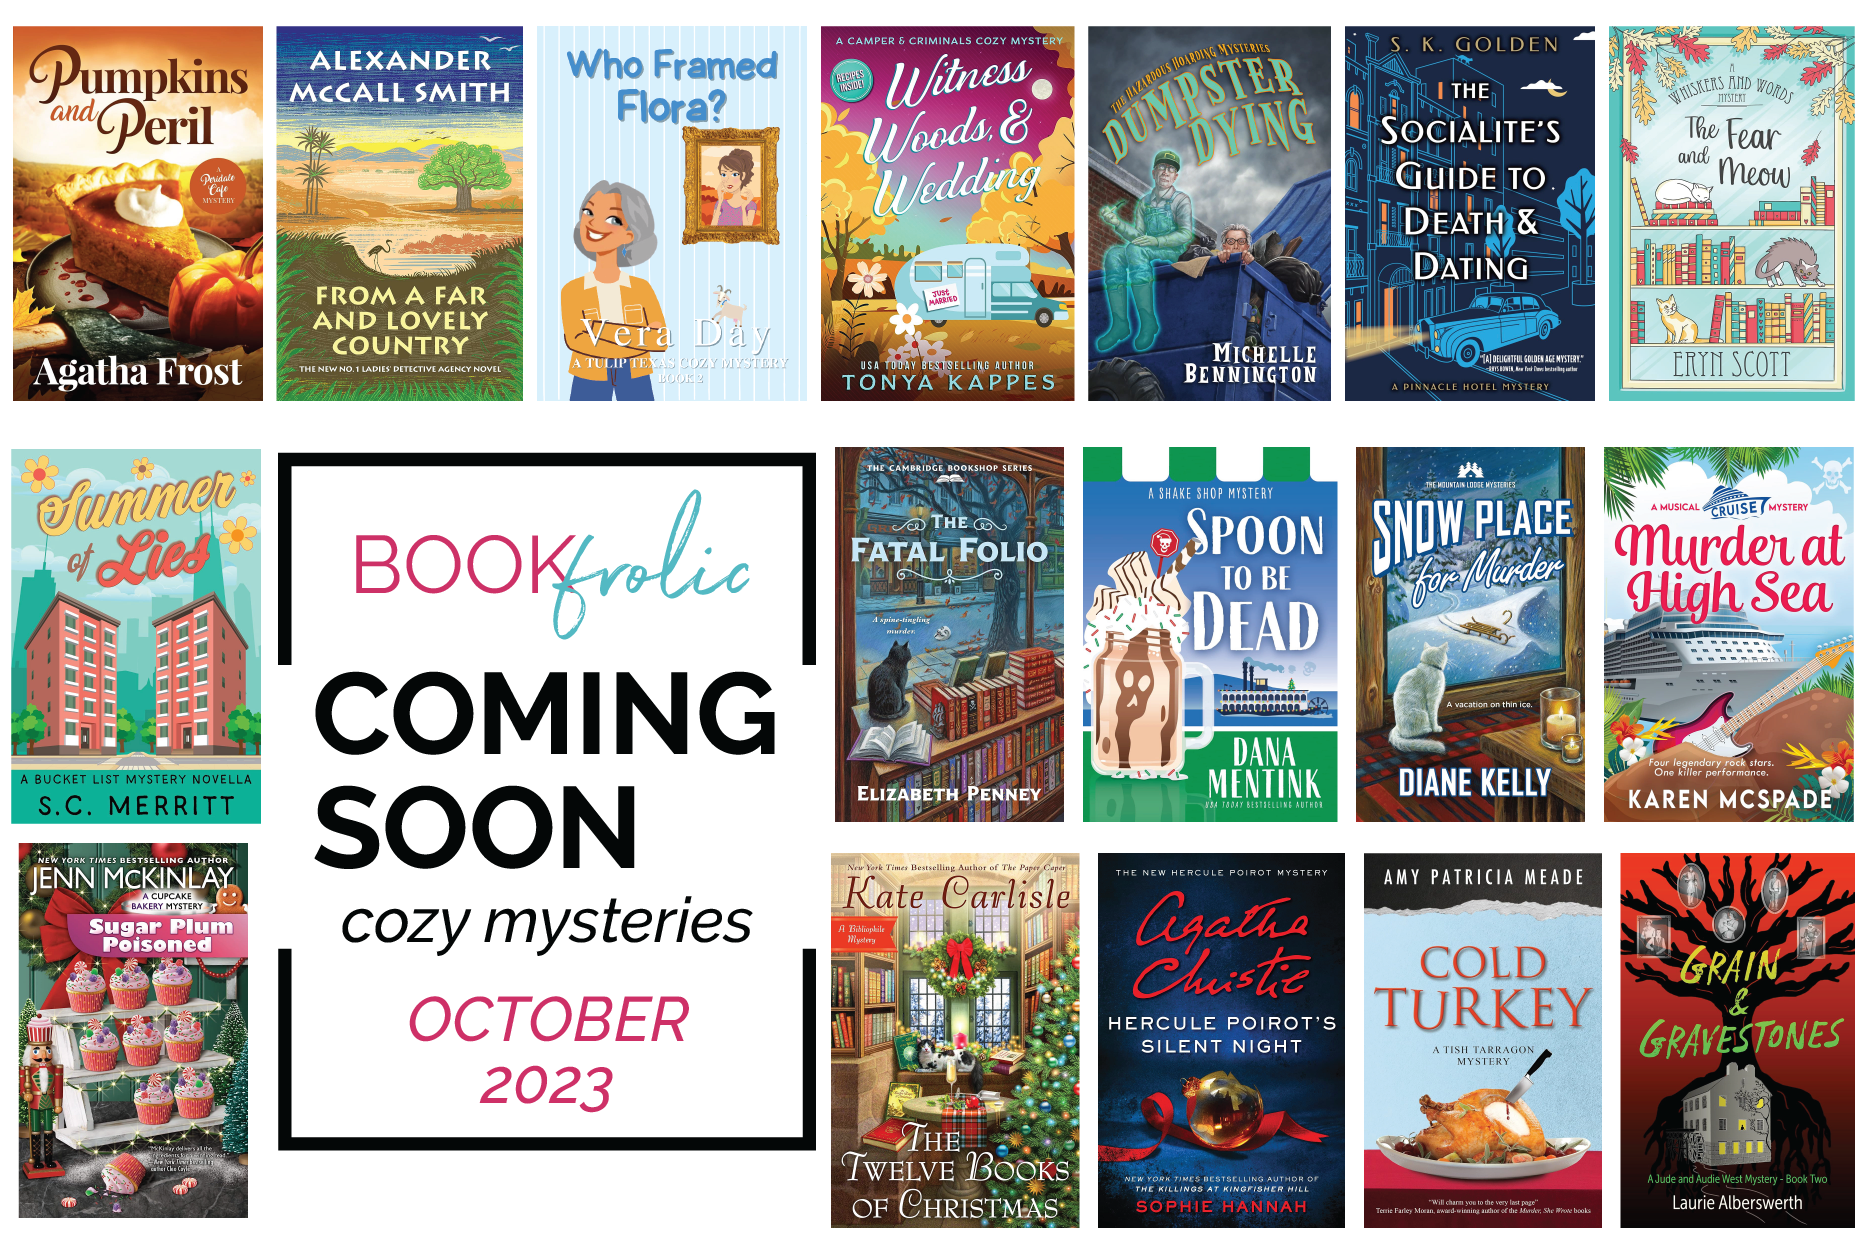 New release cozy mysteries for October 2023